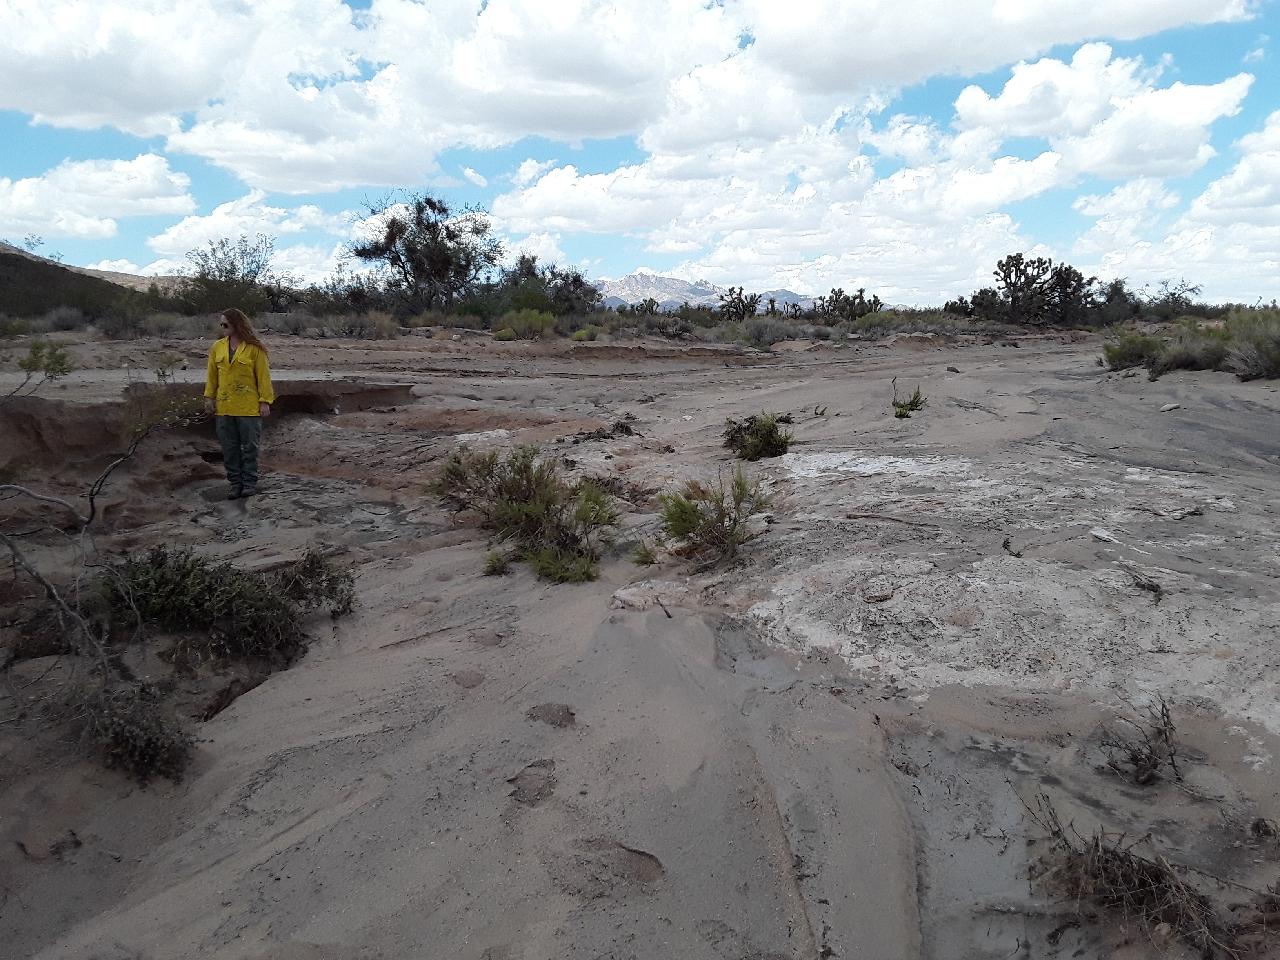 A BLM scientist stands in a washed out desert road in the York Fire area on 8/14/23